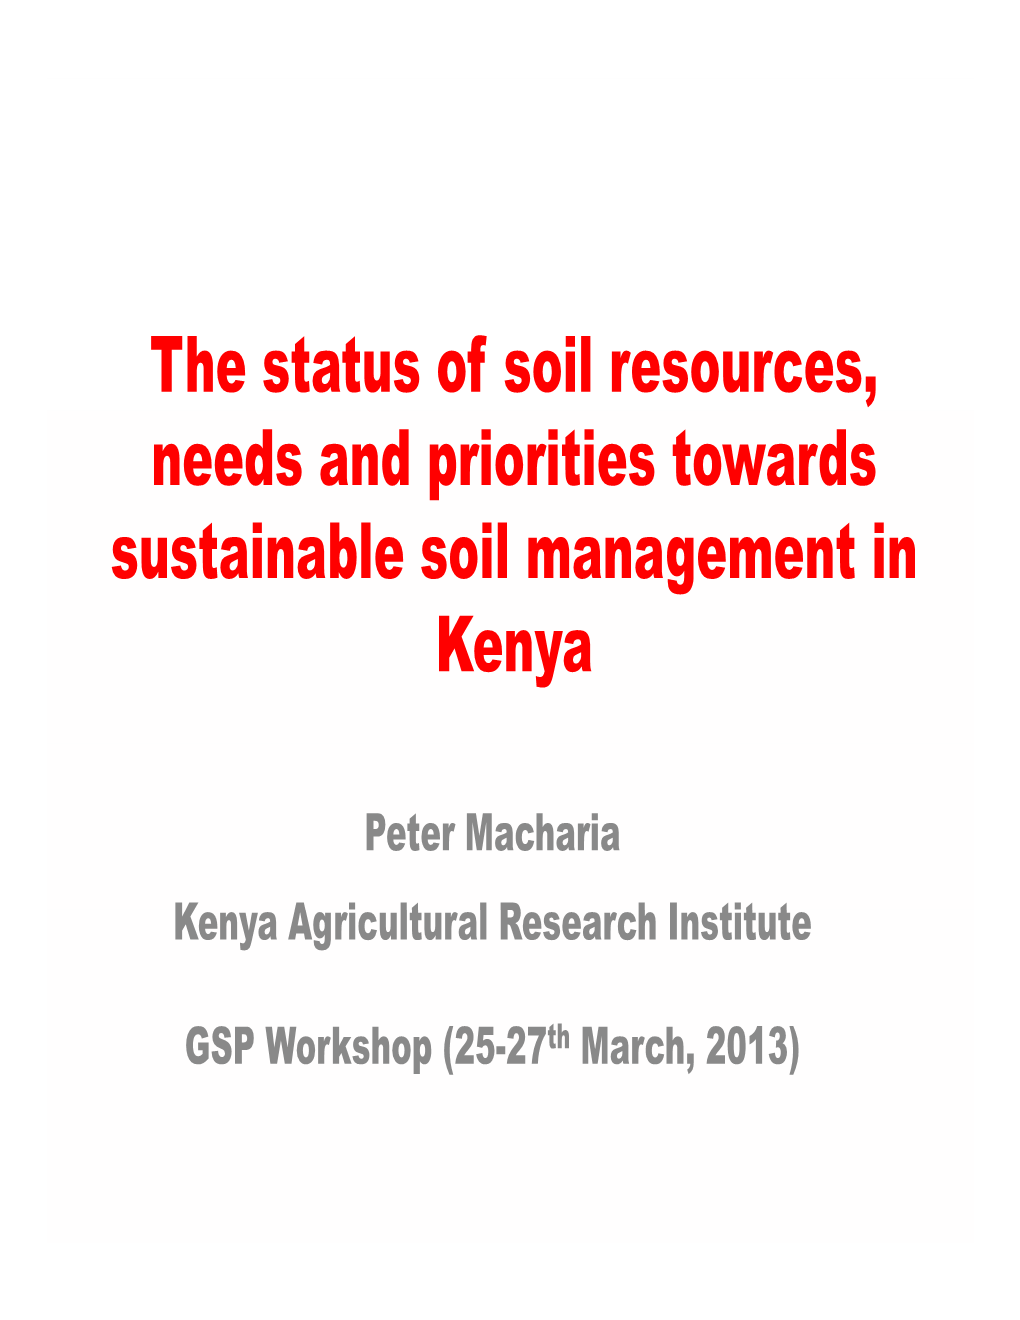 The Status of Soil Resources, Needs and Priorities Towards Sustainable Soil Management in Kenya